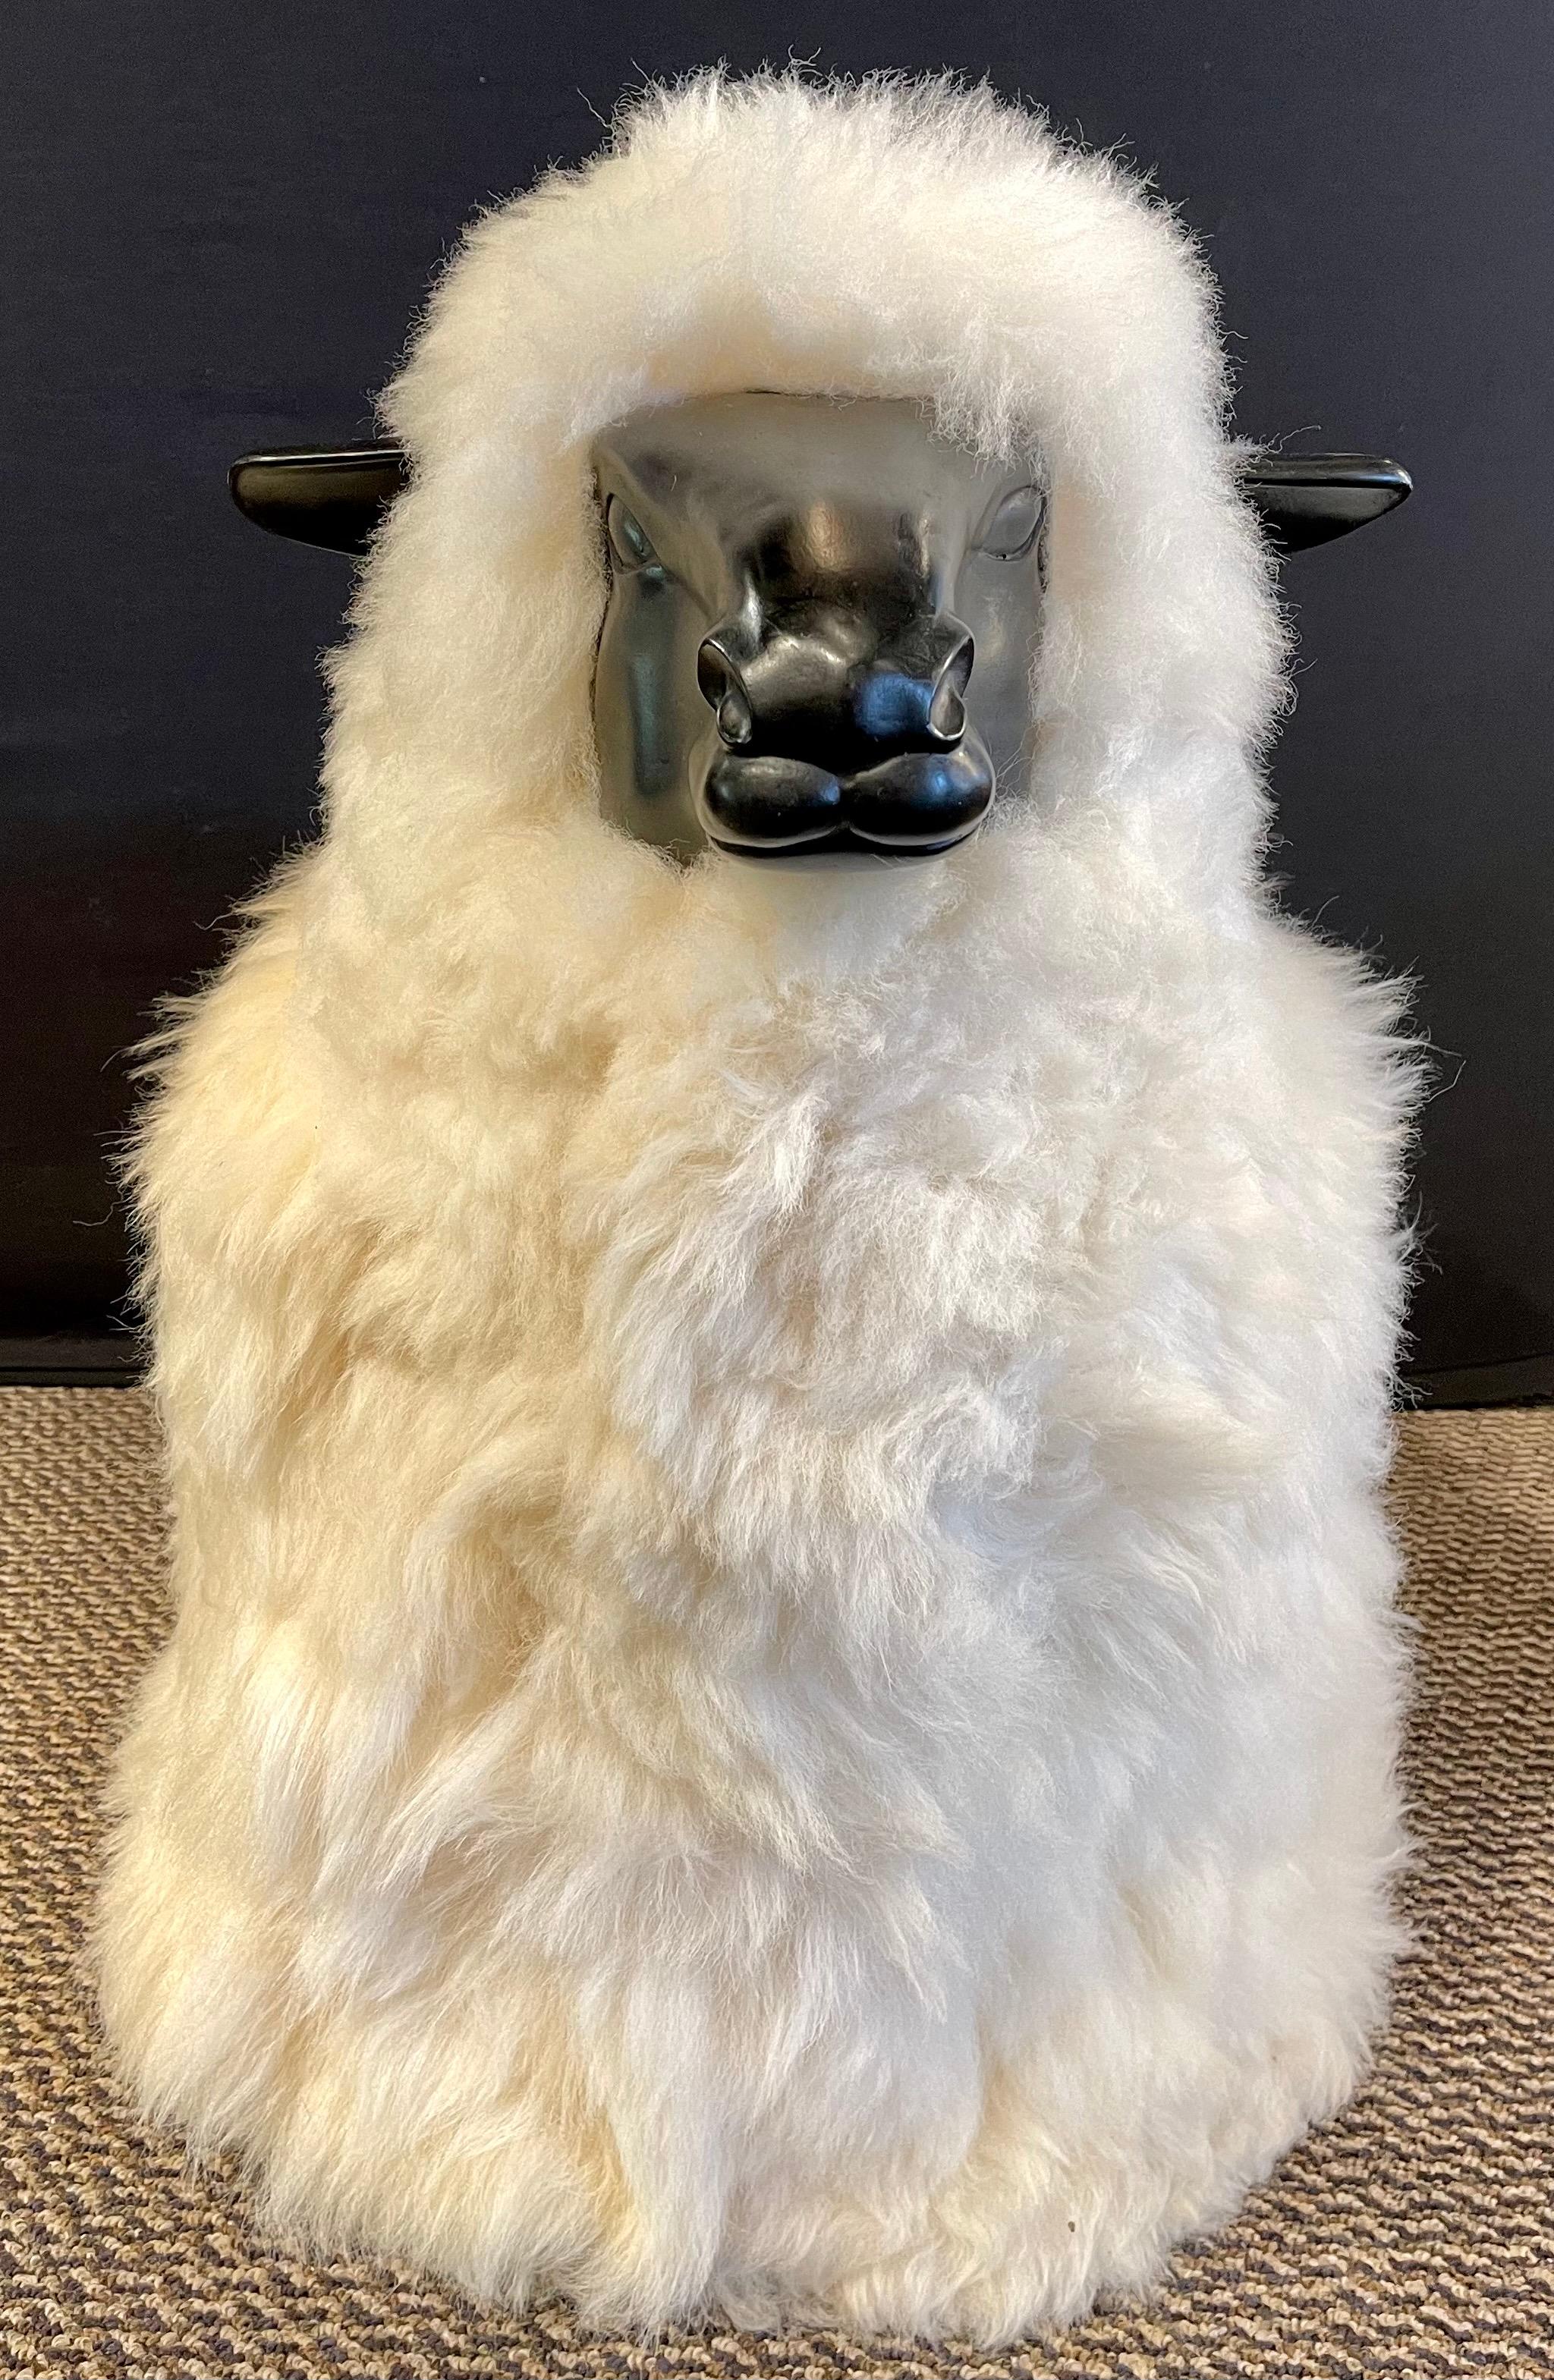 Large Mid-Century Modern Francois Lalanne Style Sheep Sculpture, Wool / Resin
 
One large wool / resin sheep. Finely detailed in authentic shearling. There is a pair sold separately. This item was purchased without the legs.

This is part of our